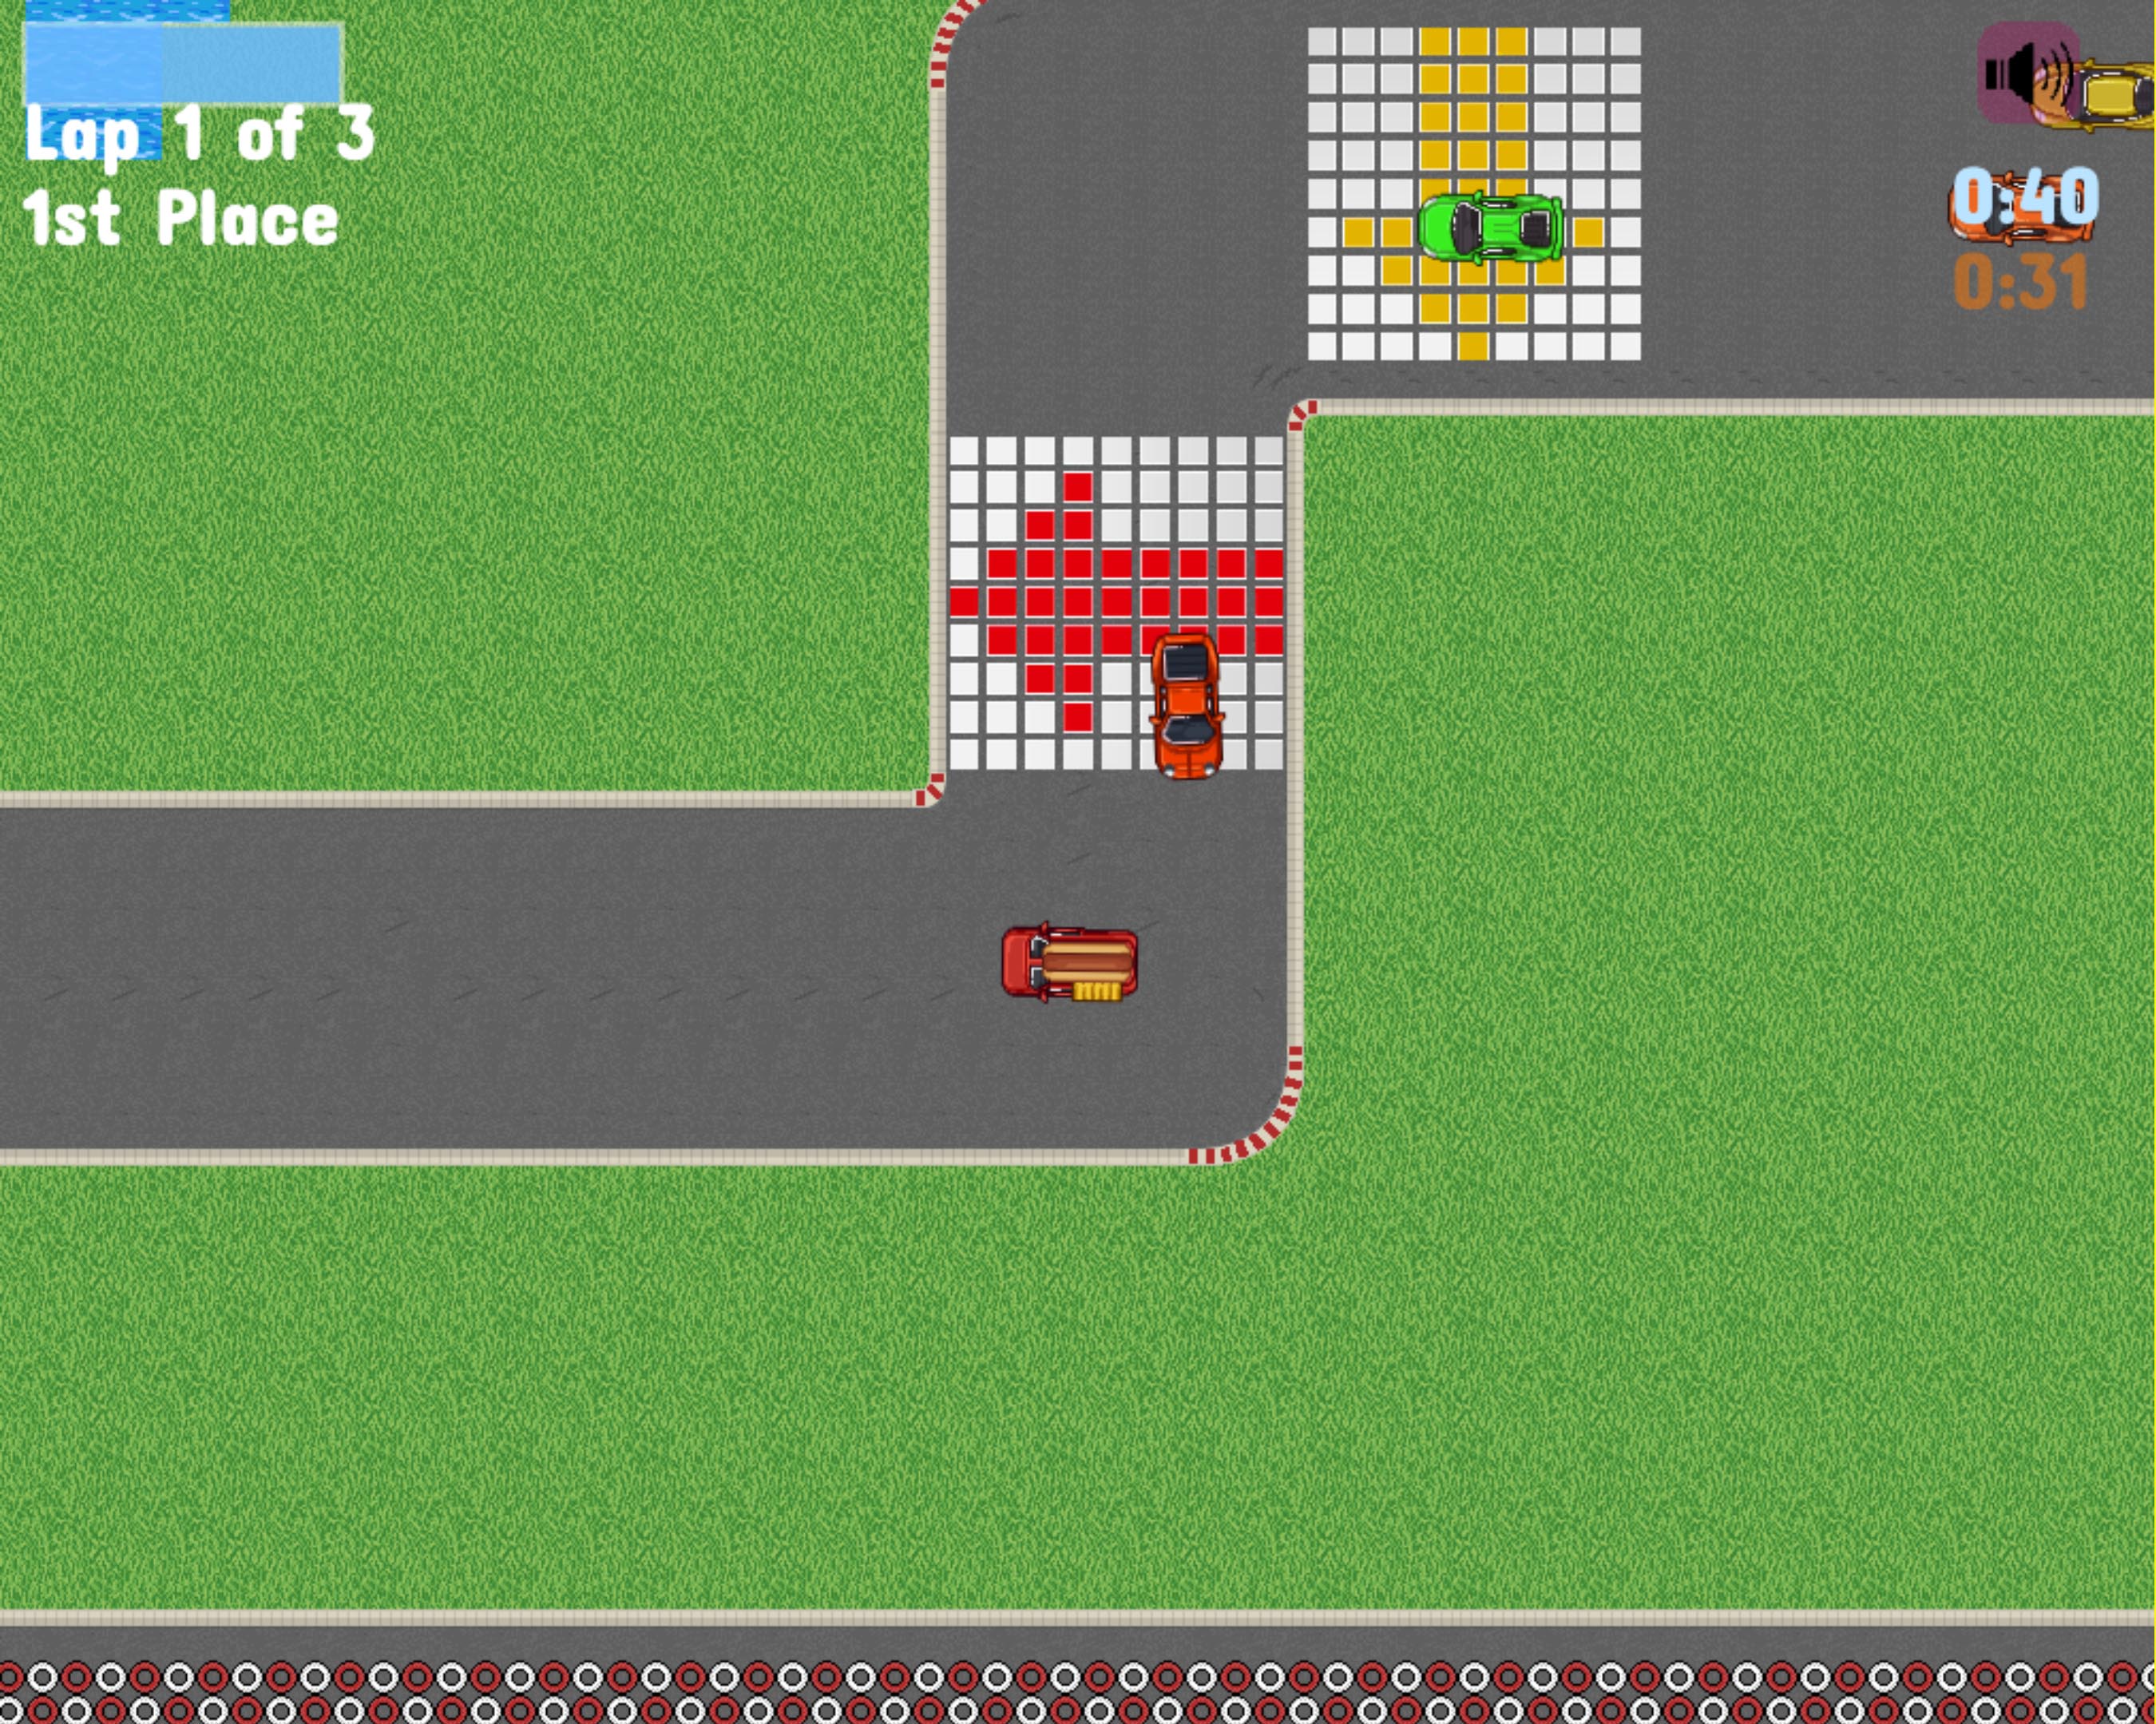 This is a screenshot from Conflict Cars. The player is a hotdog truck racing through a grass level.